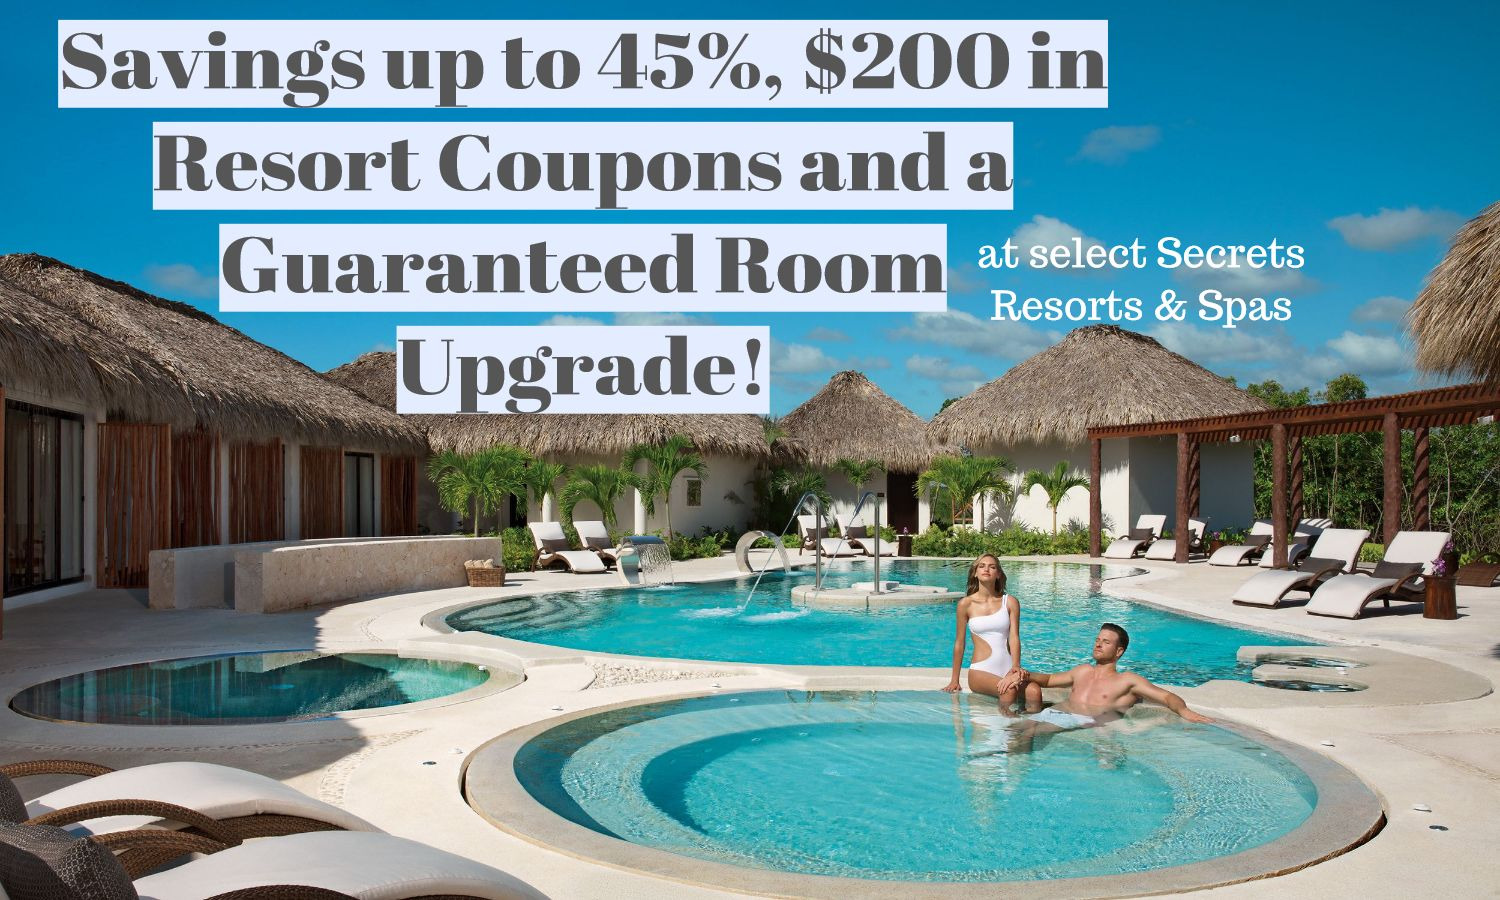 Savings up to 45%, $200 in Resort Coupons and a Guaranteed Room Upgrade! - TravelSearch Guru